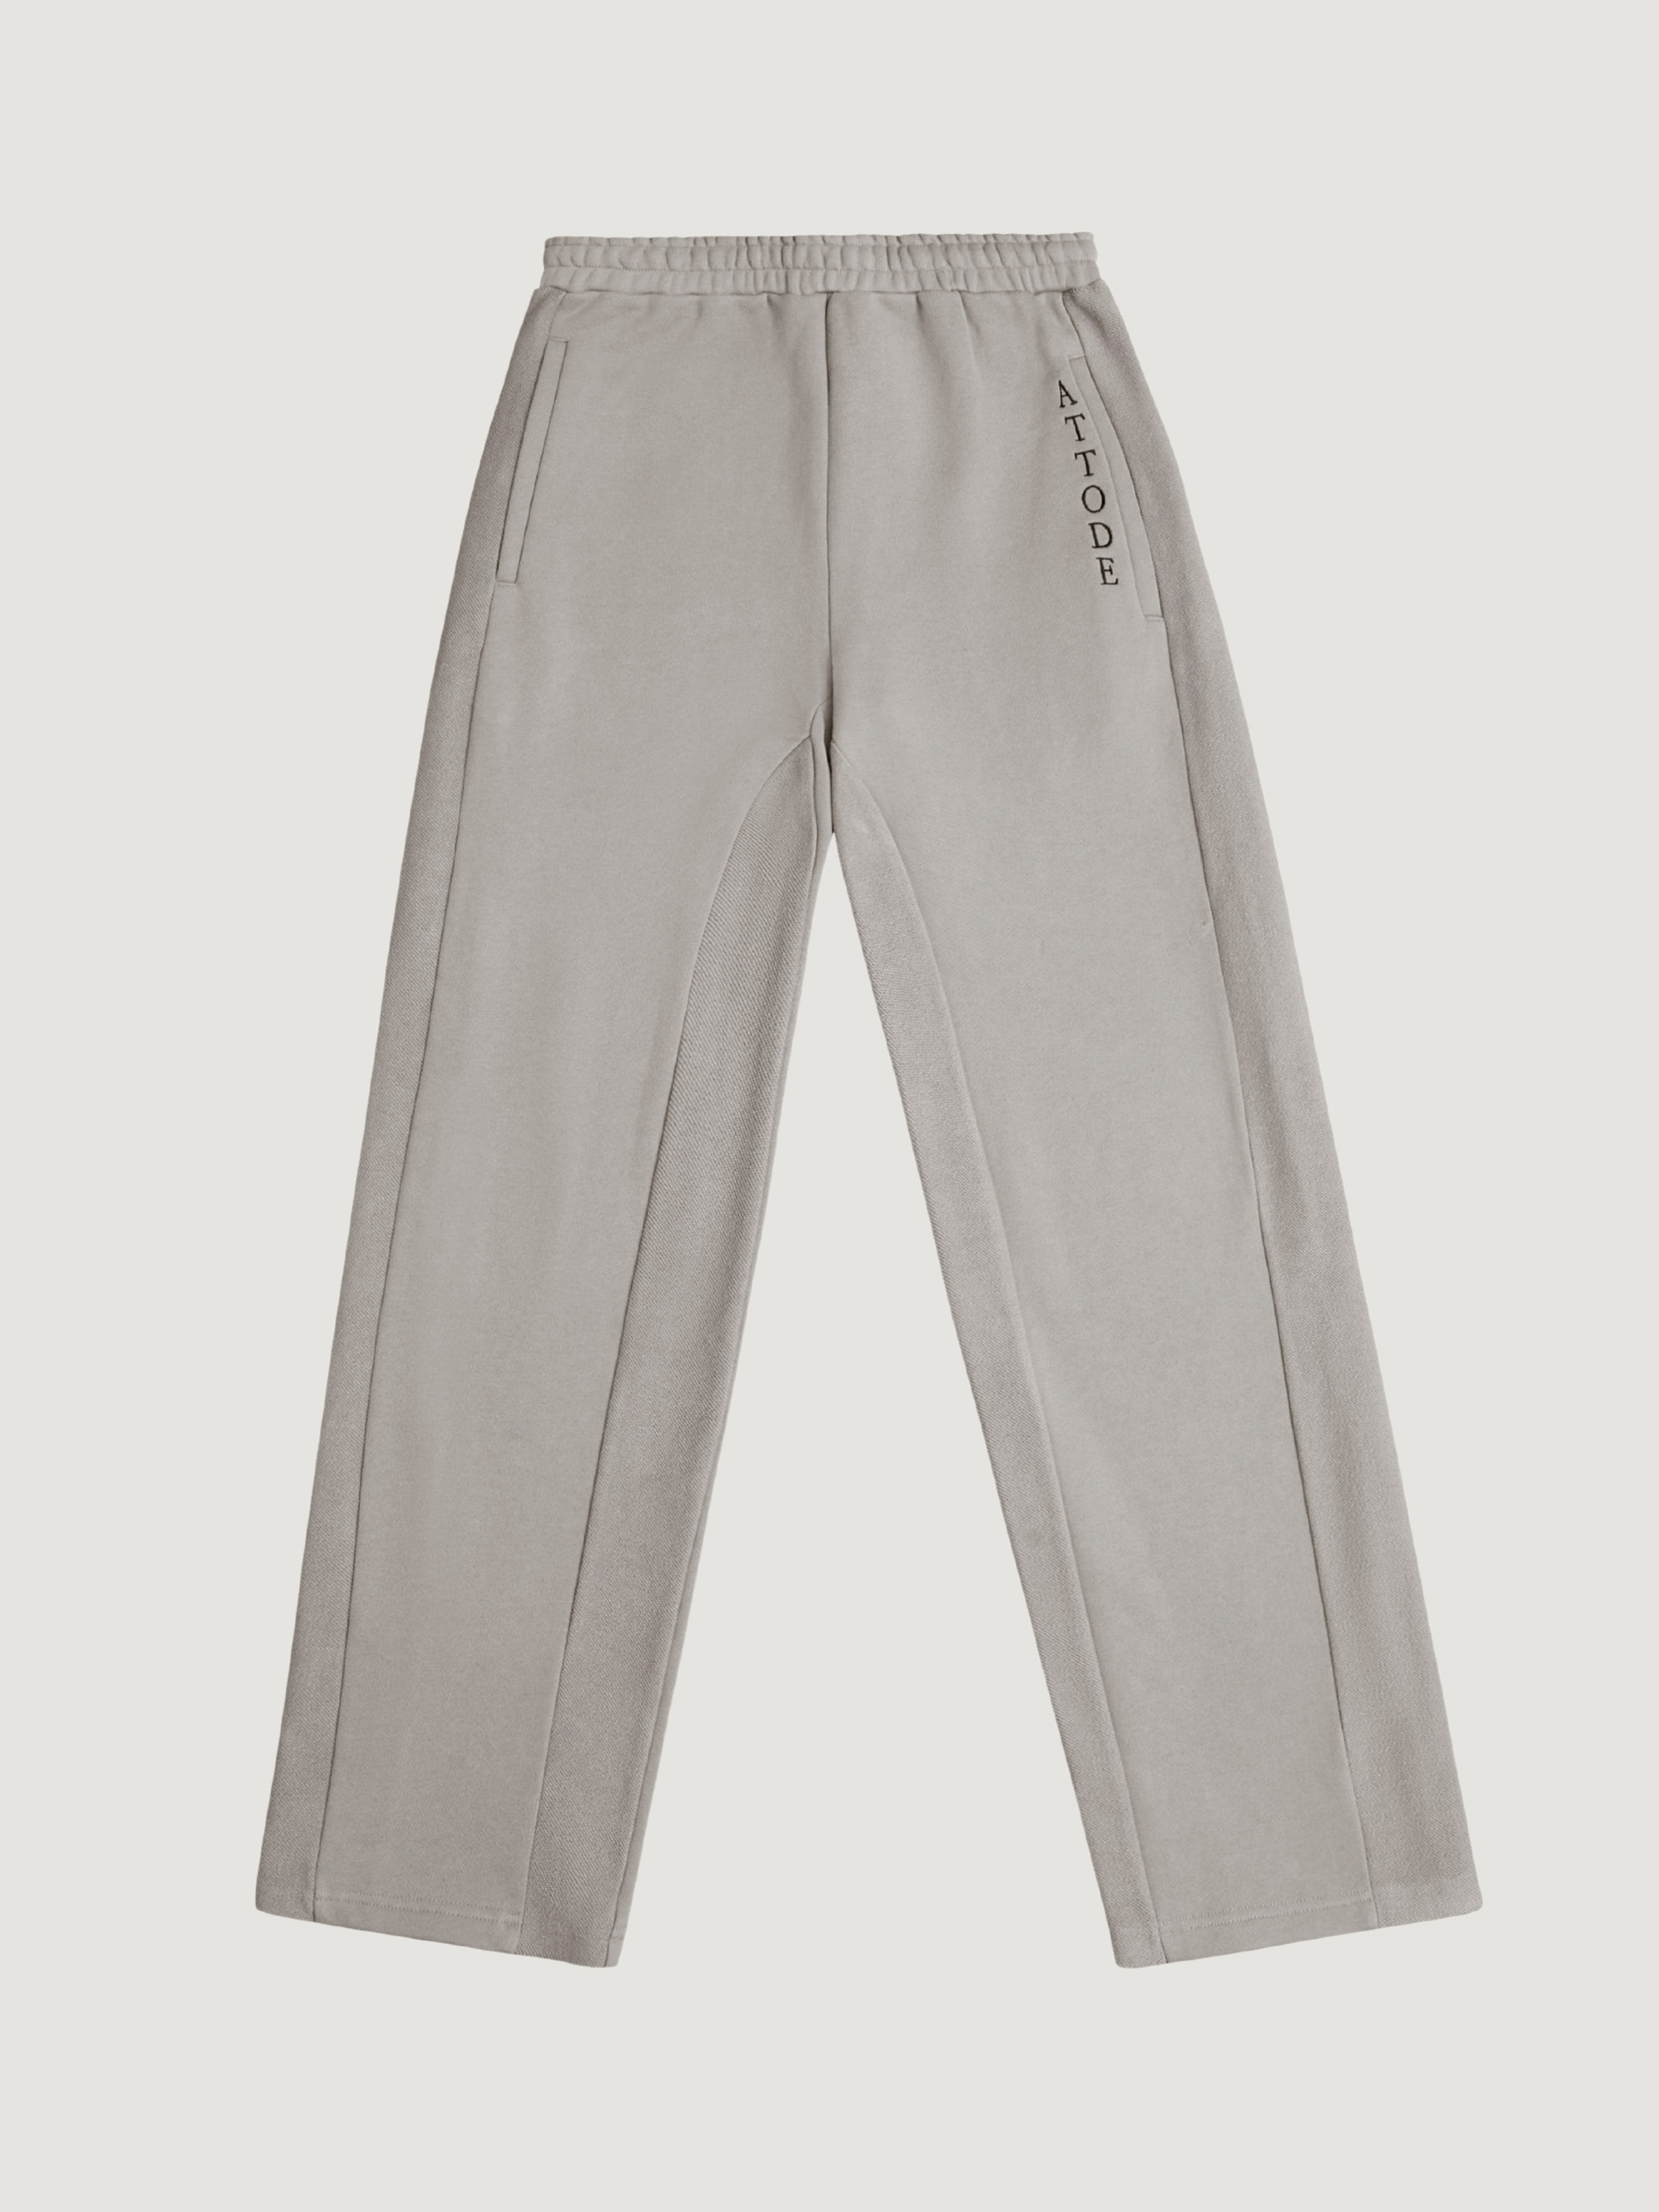 INSIDE OUT SWEATPANTS GREY - ATTODE